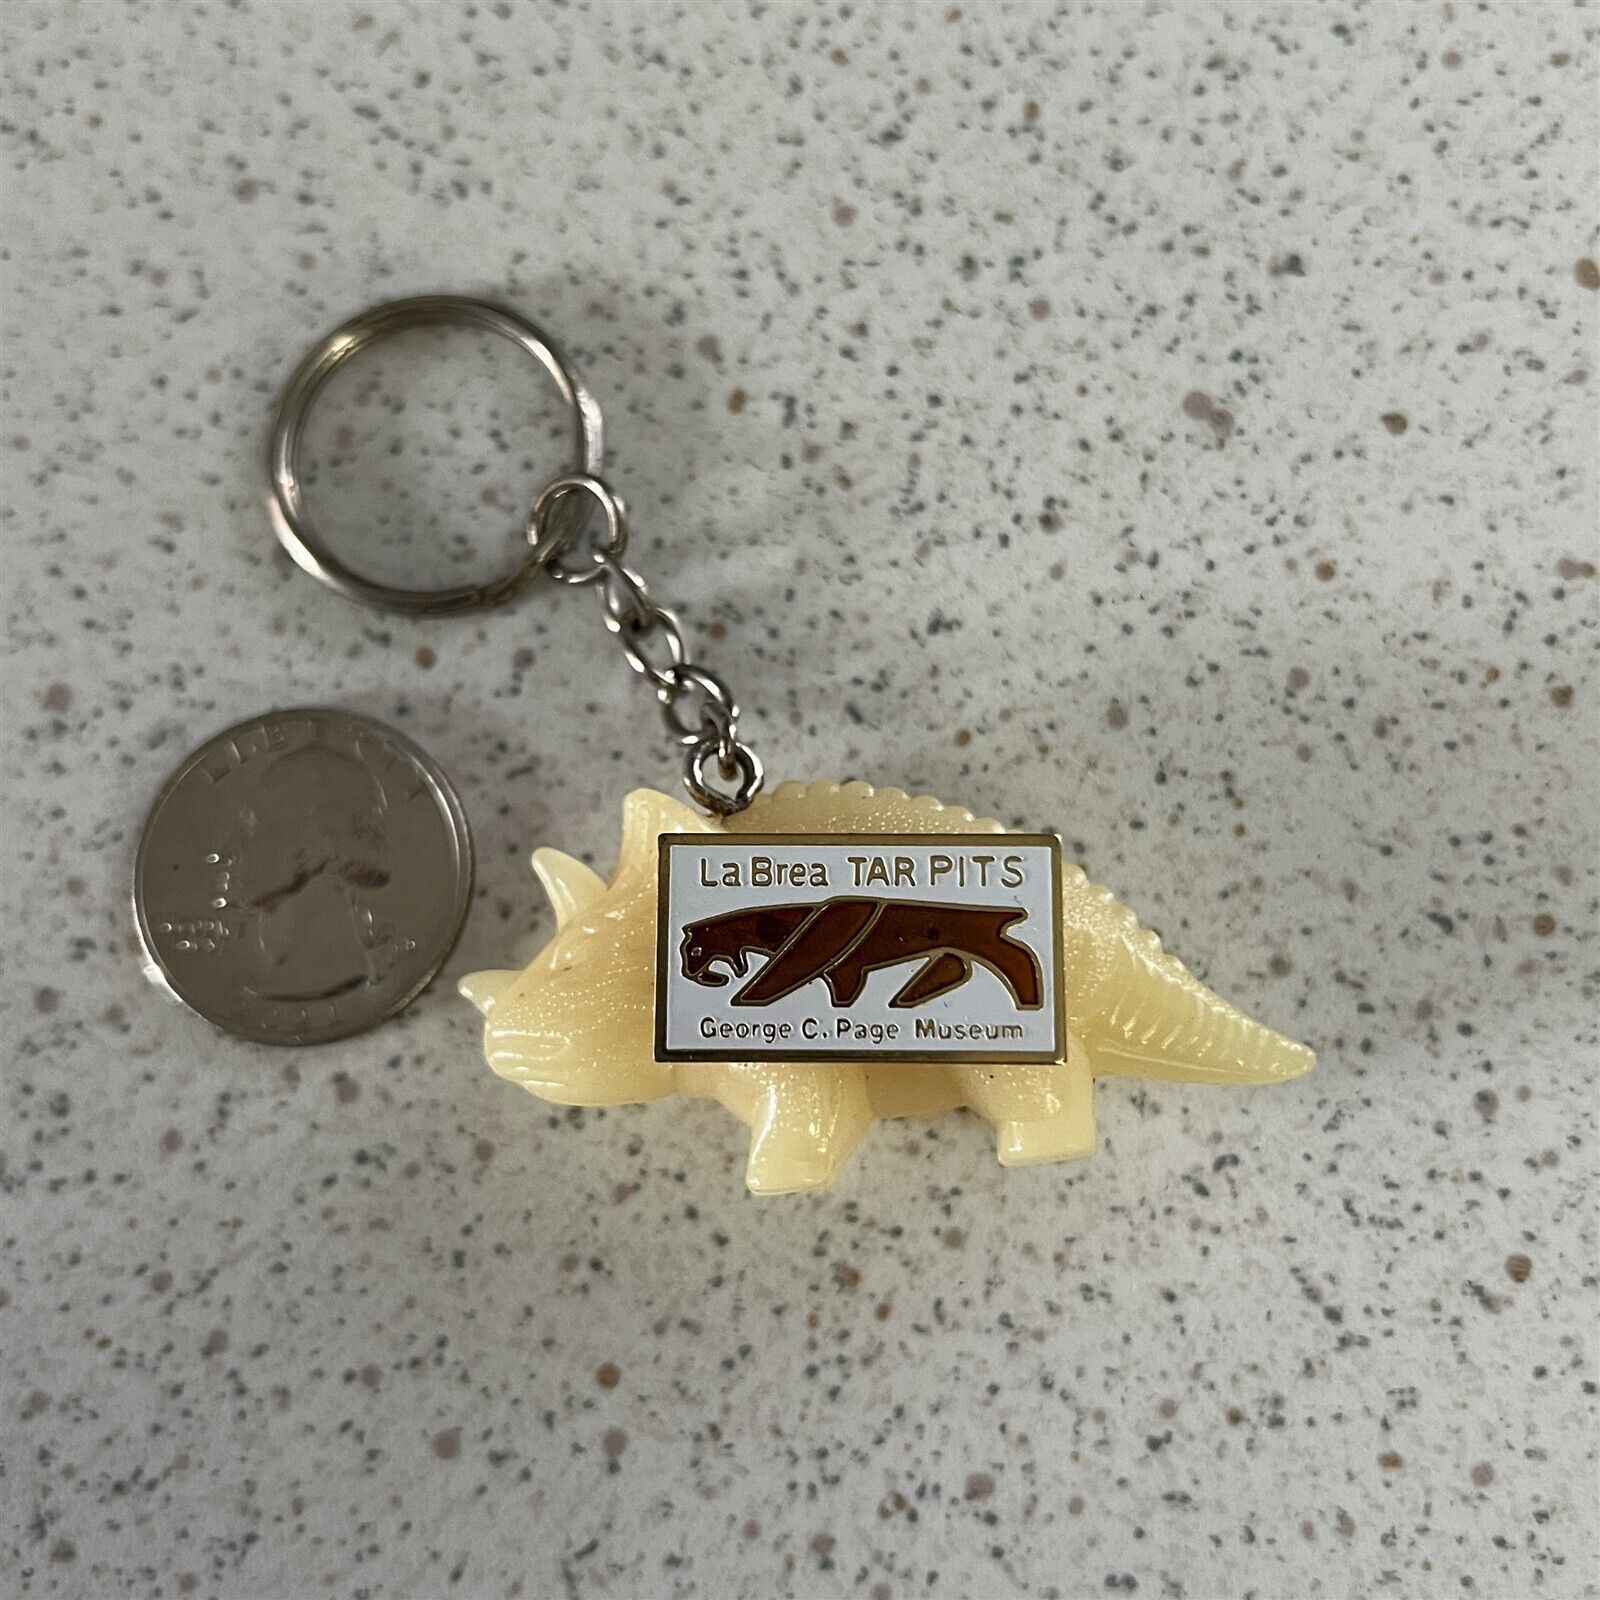 La Brea Tar Pits George Page Museum Triceratops Souvenir Keychain Key Ring 44858